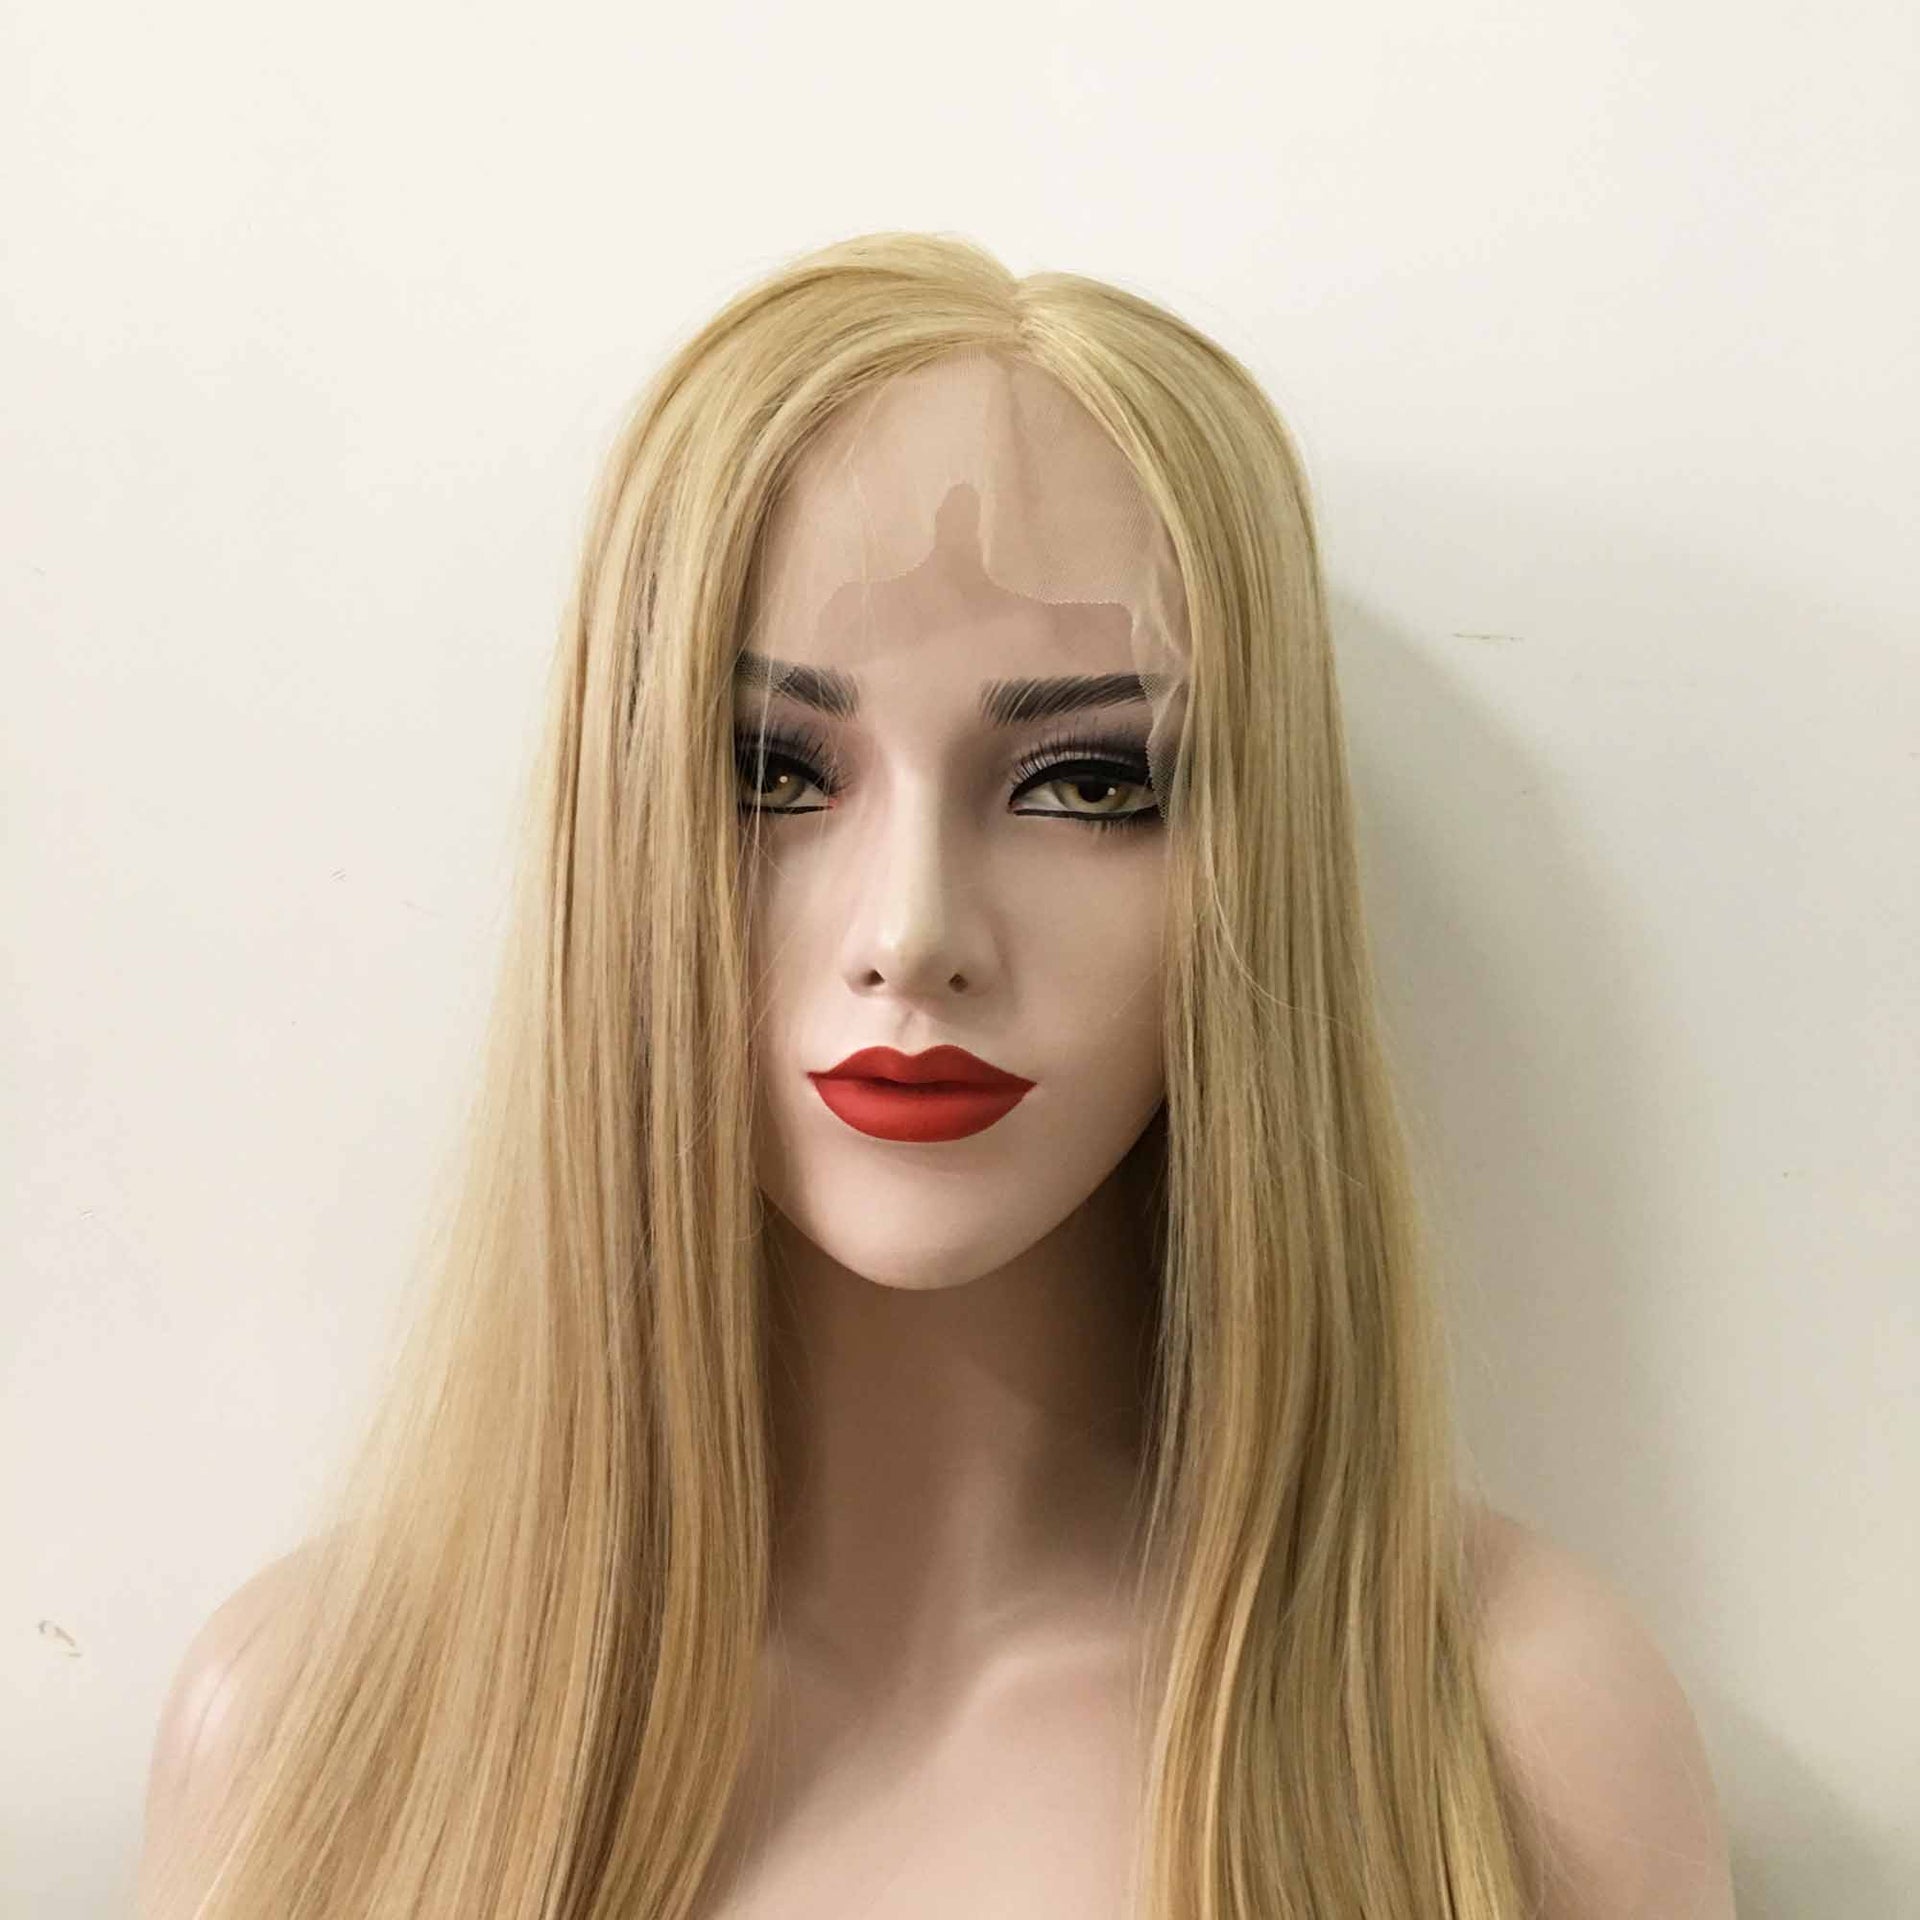 nevermindyrhead Women Blonde Lace Front 13X6 Long Straight Side Part Wig